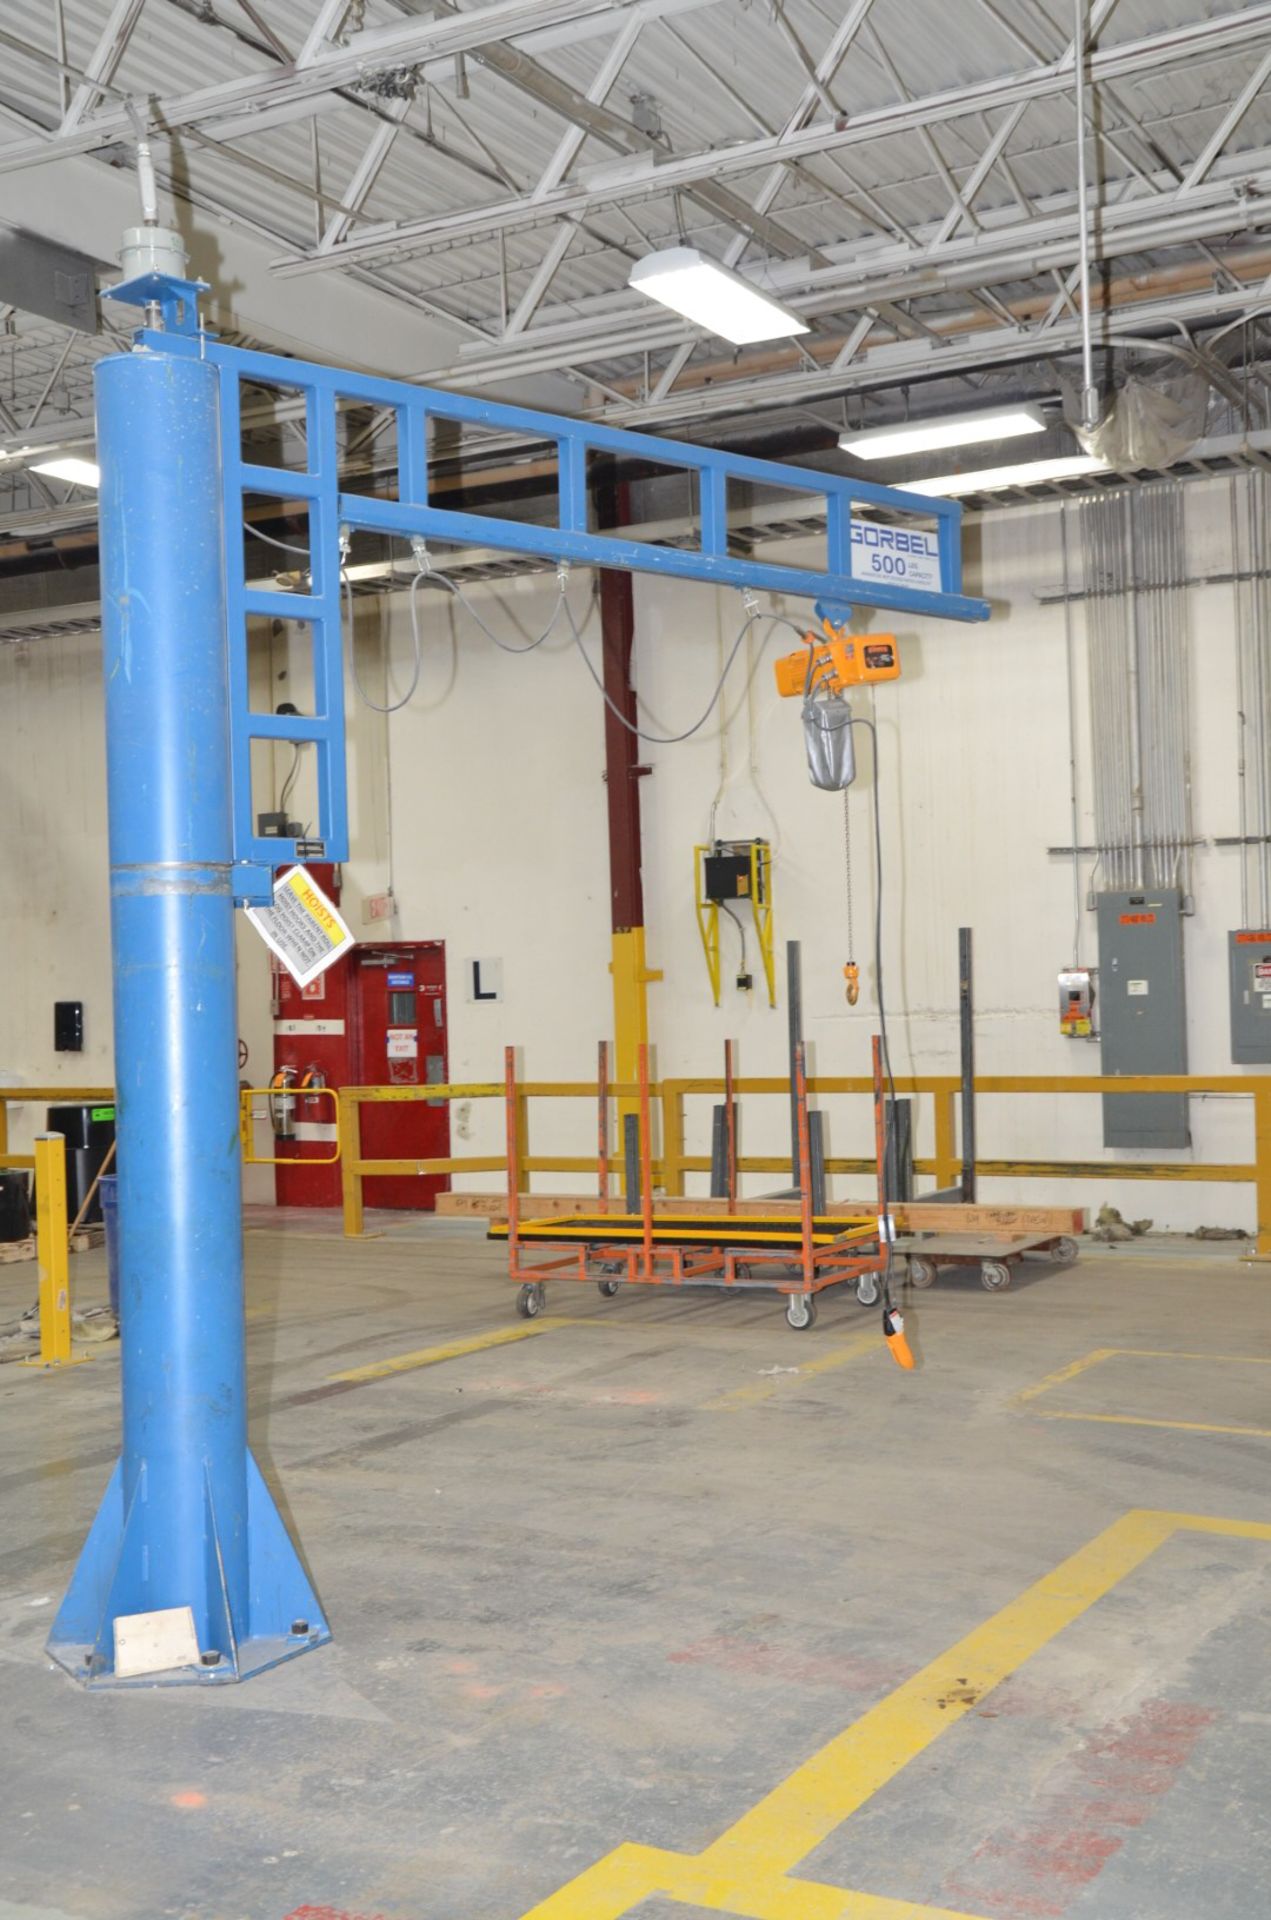 GORBEL 500 LB. CAPACITY FREESTANDING JIB CRANE WITH ELECTRIC CHAIN HOIST, 11' SPAN, 9' HEIGHT - Image 2 of 5